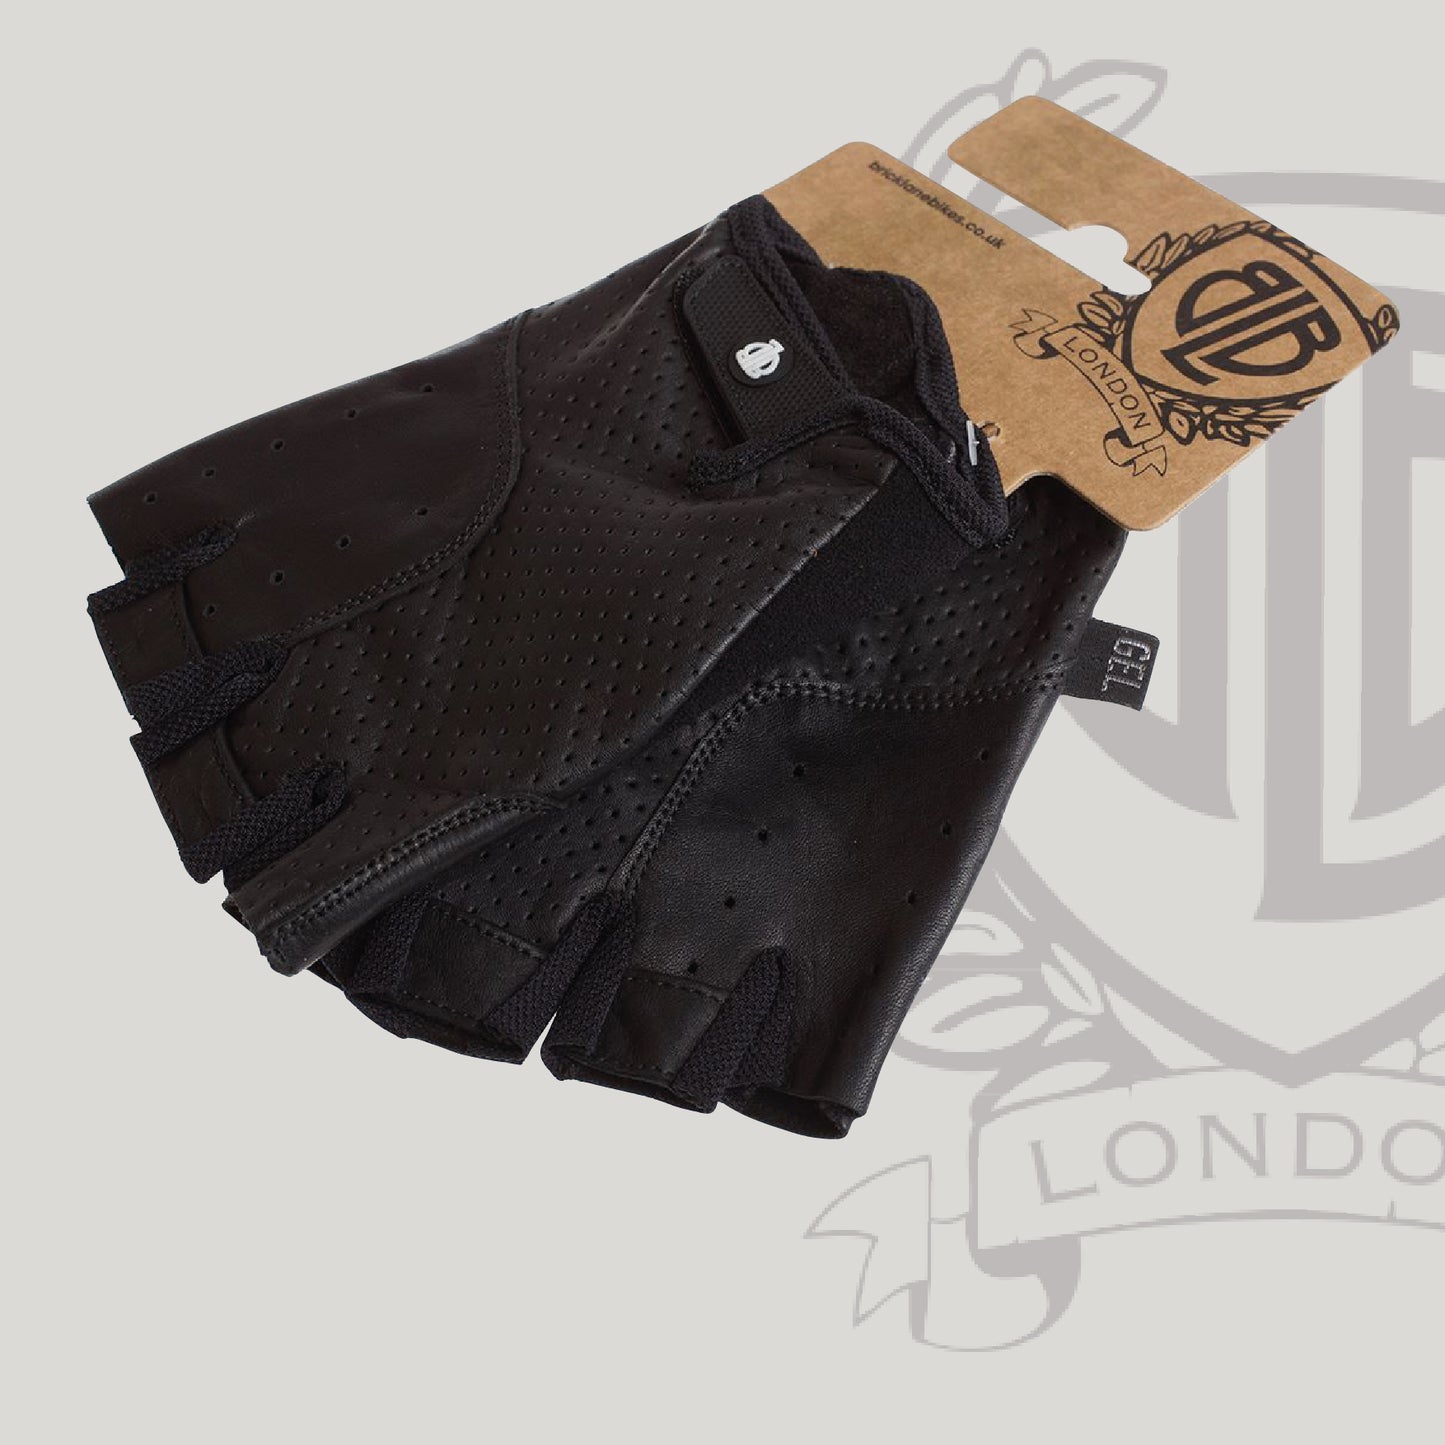 BLB Classic Leather Cycling Gloves - All Black